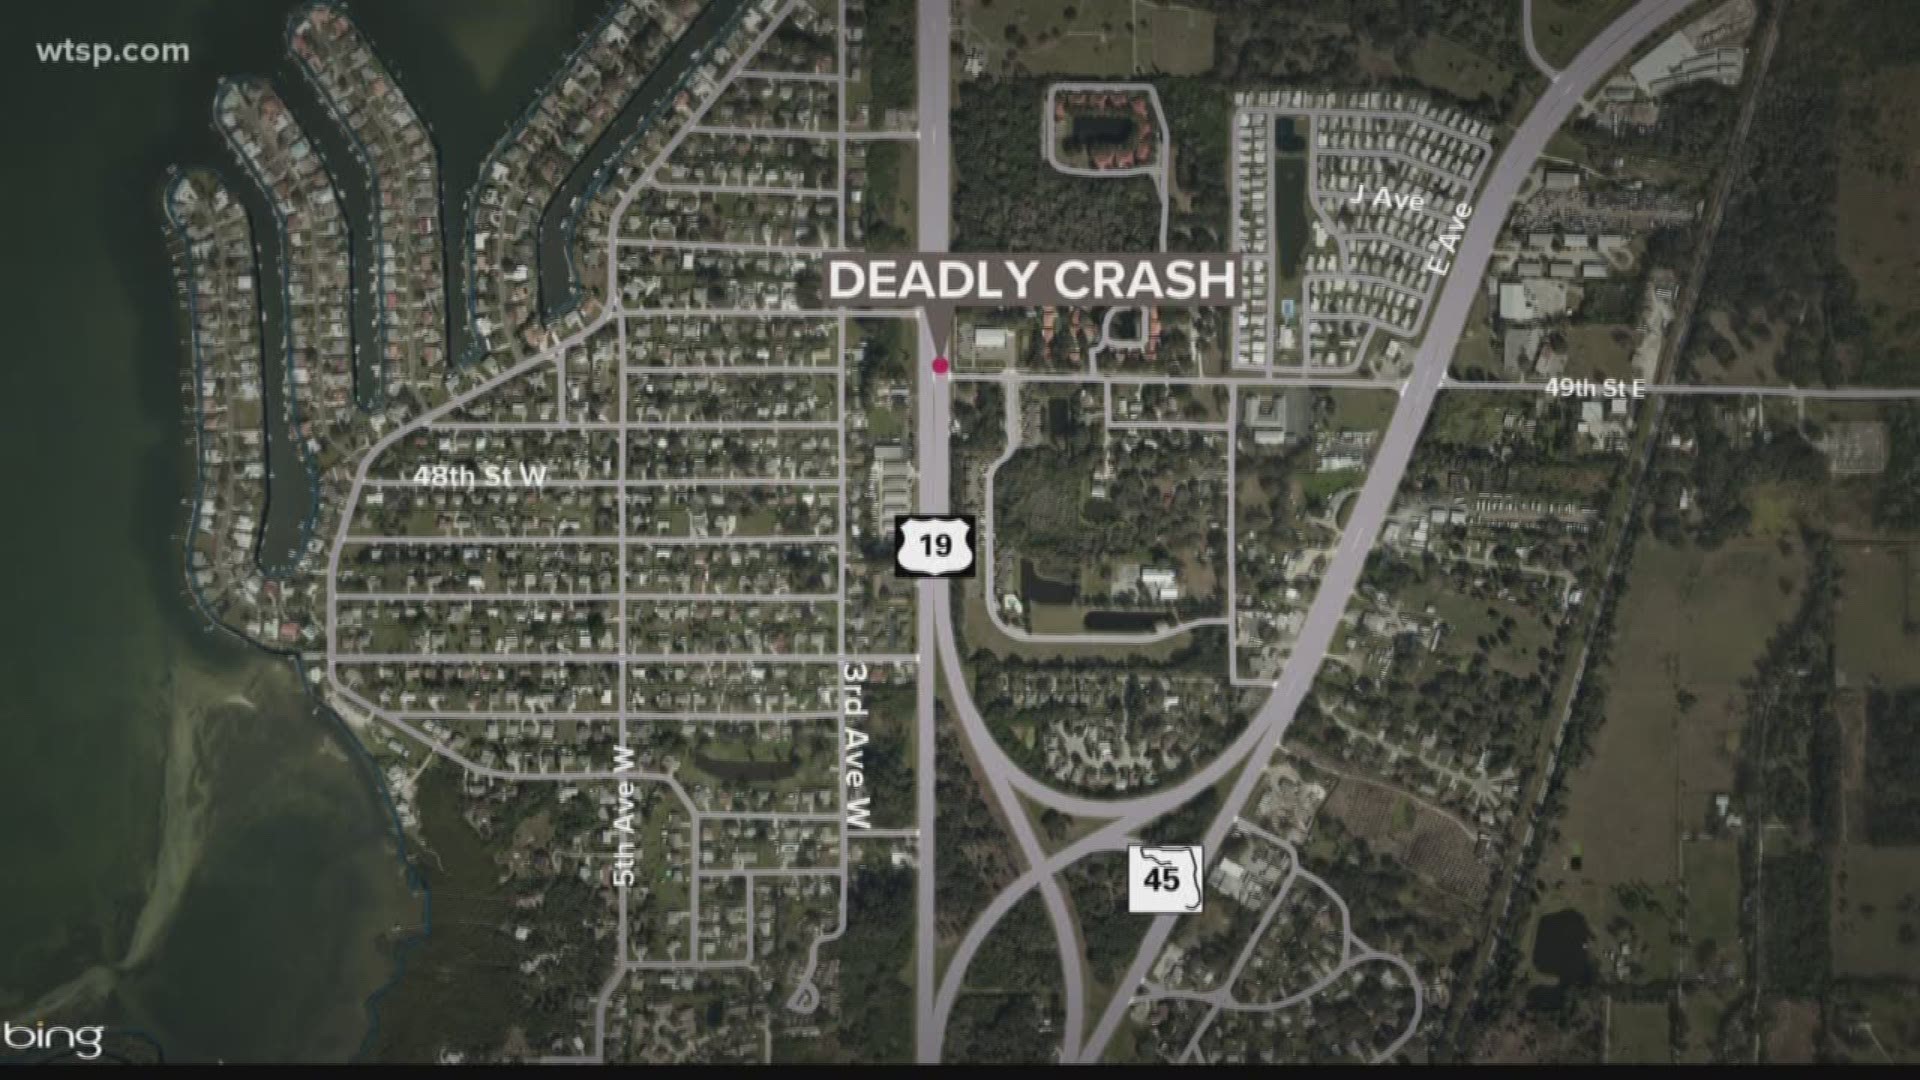 The search is on for the driver of a pickup truck believed to have hit and killed two pedestrians early Saturday morning.

It happened just after 2:30 a.m. on U.S. 19 at 49th Street East, according to the Florida Highway Patrol.

Troopers say a 47-year-old man and a 13-year-old were walking south on U.S. 19 on the shoulder when a white Chevrolet Silverado drove off the road and crashed into them.